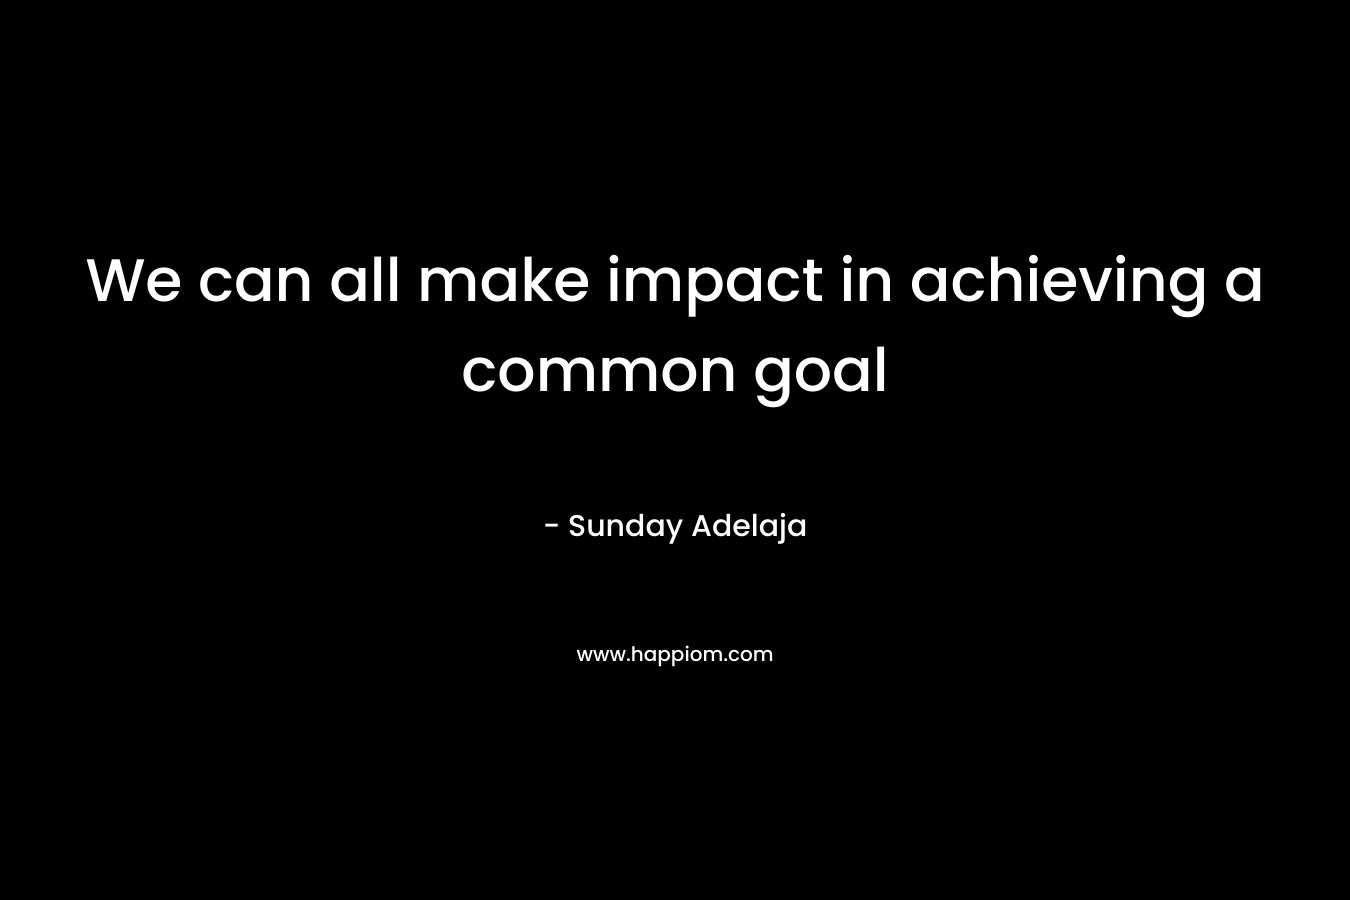 We can all make impact in achieving a common goal